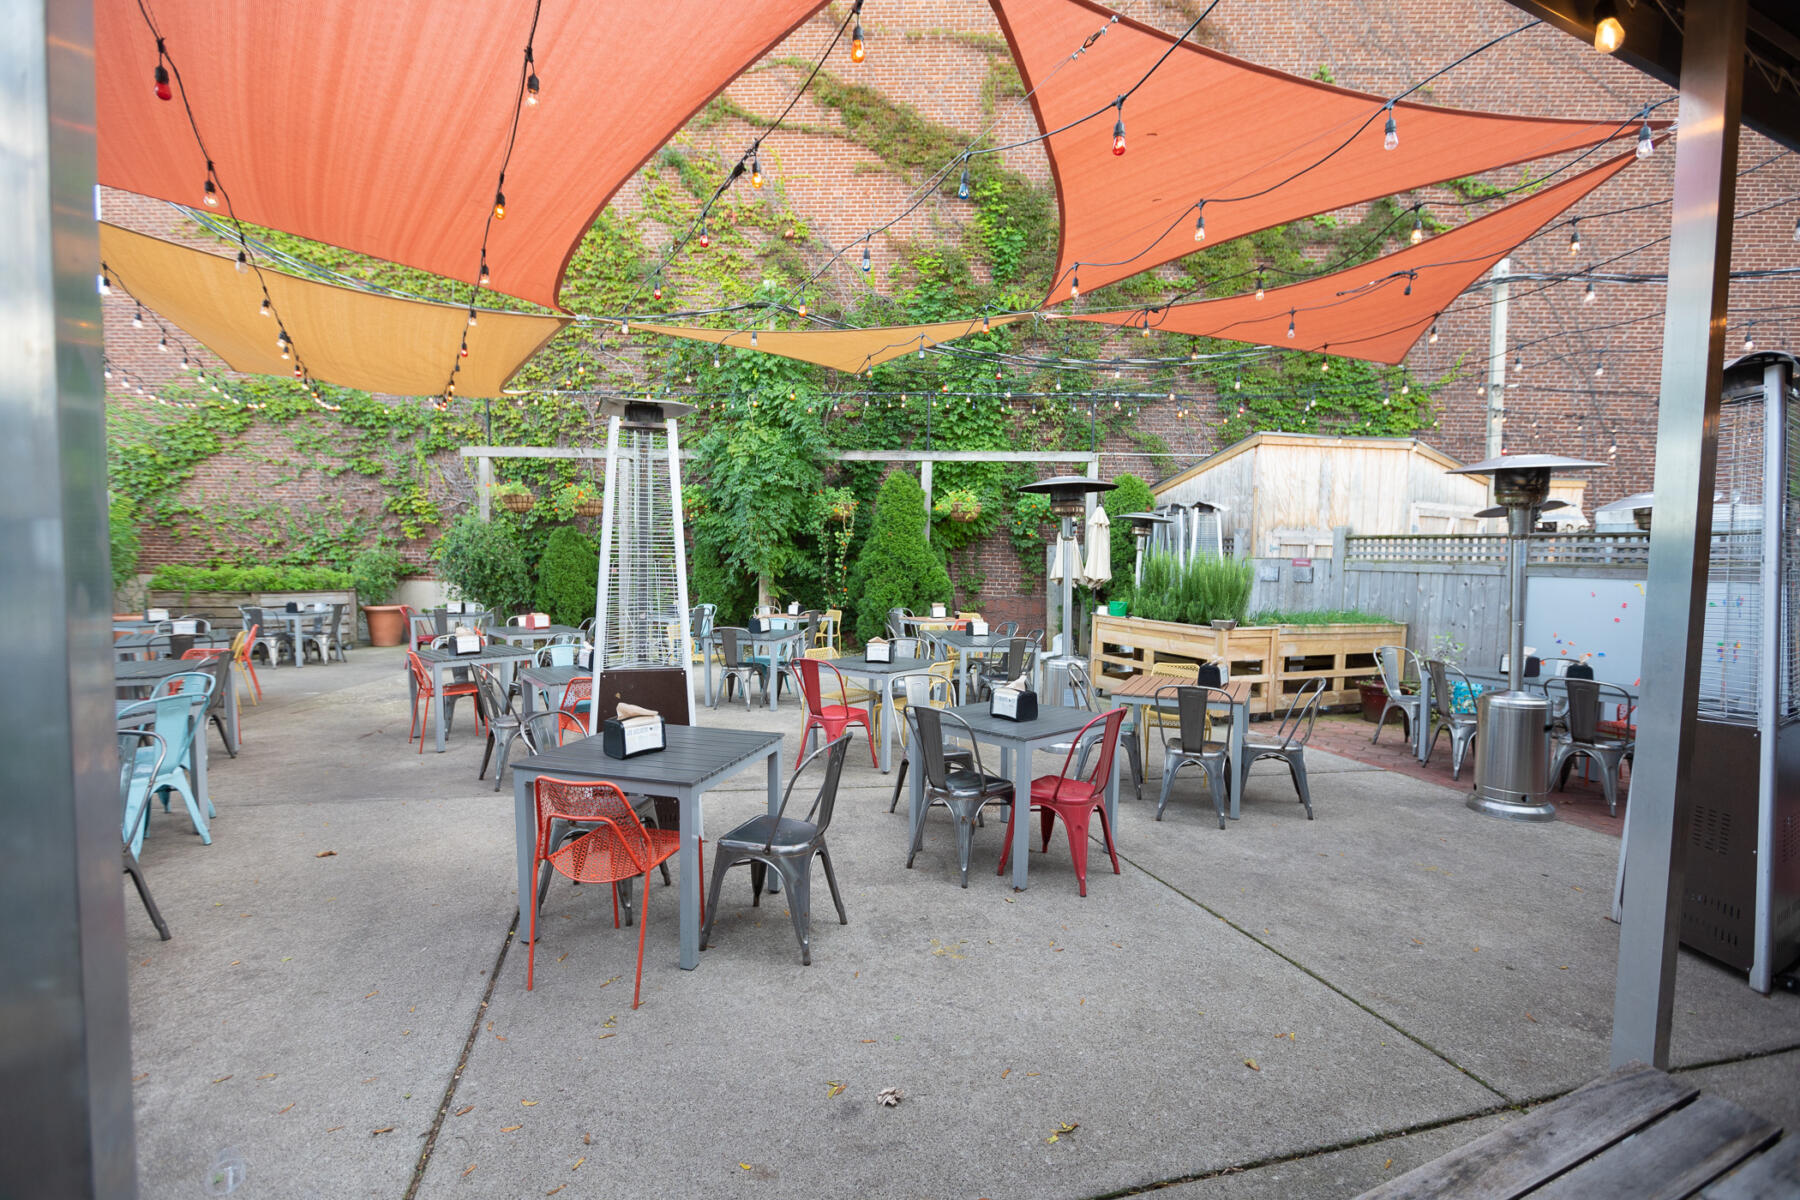 A patio in Avondale